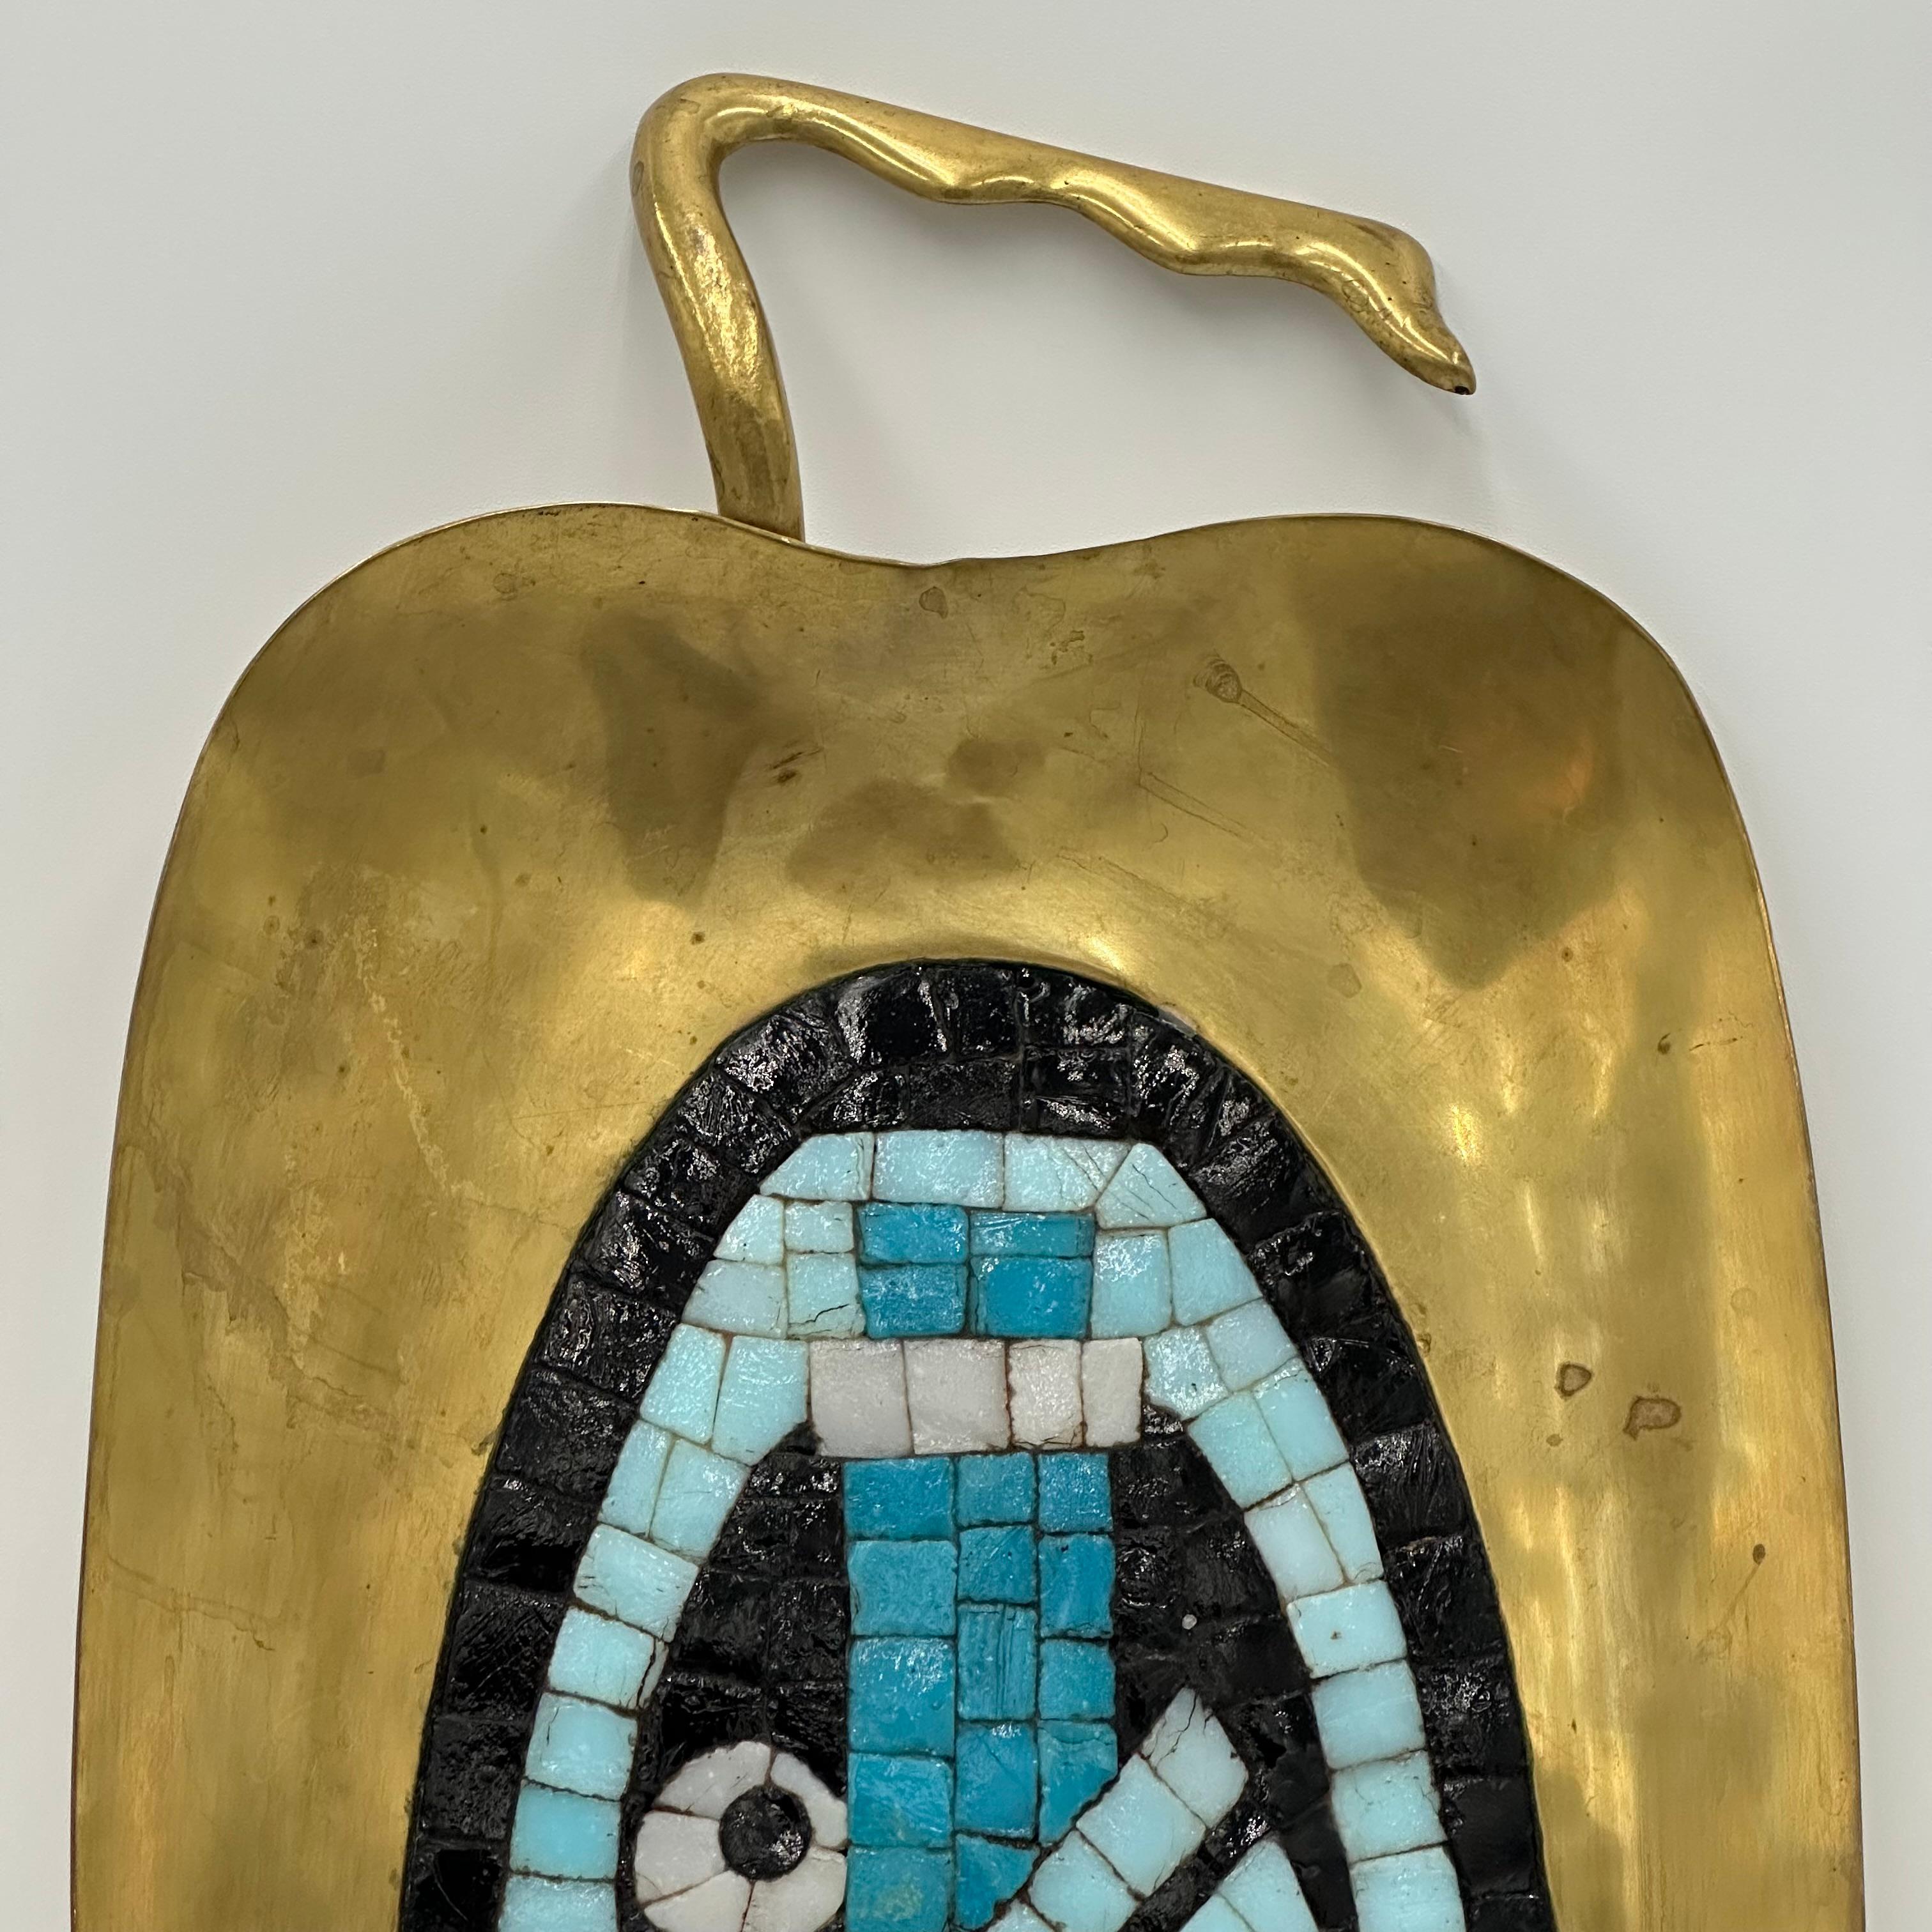 This very collectible tray by Salvador Teran, Los Castillo, Taxco, Mexico, was created in the 1950s-1960s. The mosaic design is composed of variegated blue, white, and black glass tiles, which have been set into a hand-wrought brass tray. This